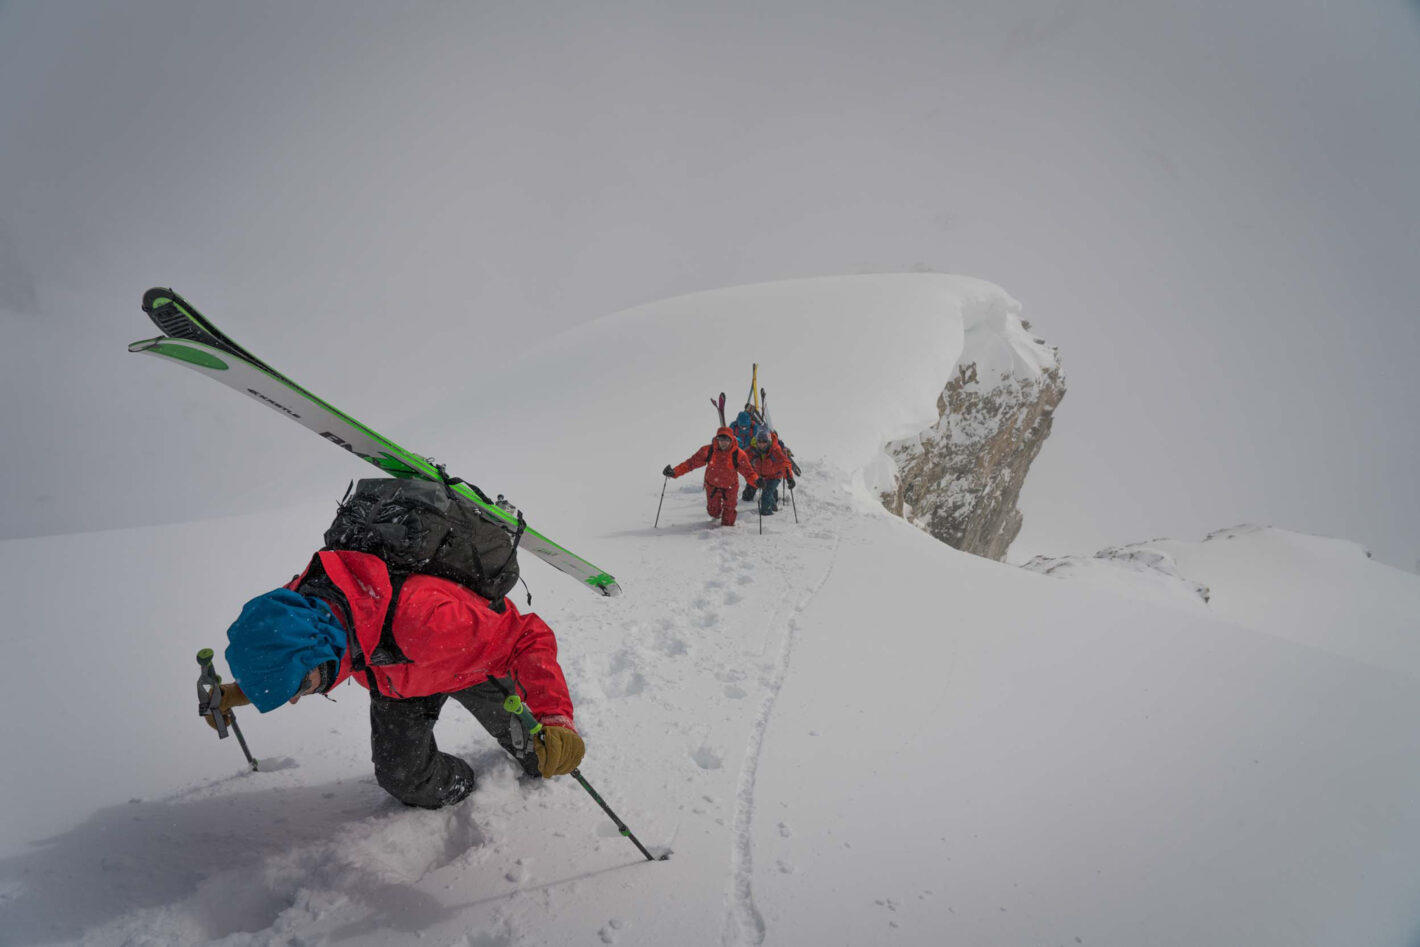 Steep ski hill perspective of two backcountry skiers climbing with gear on their backs